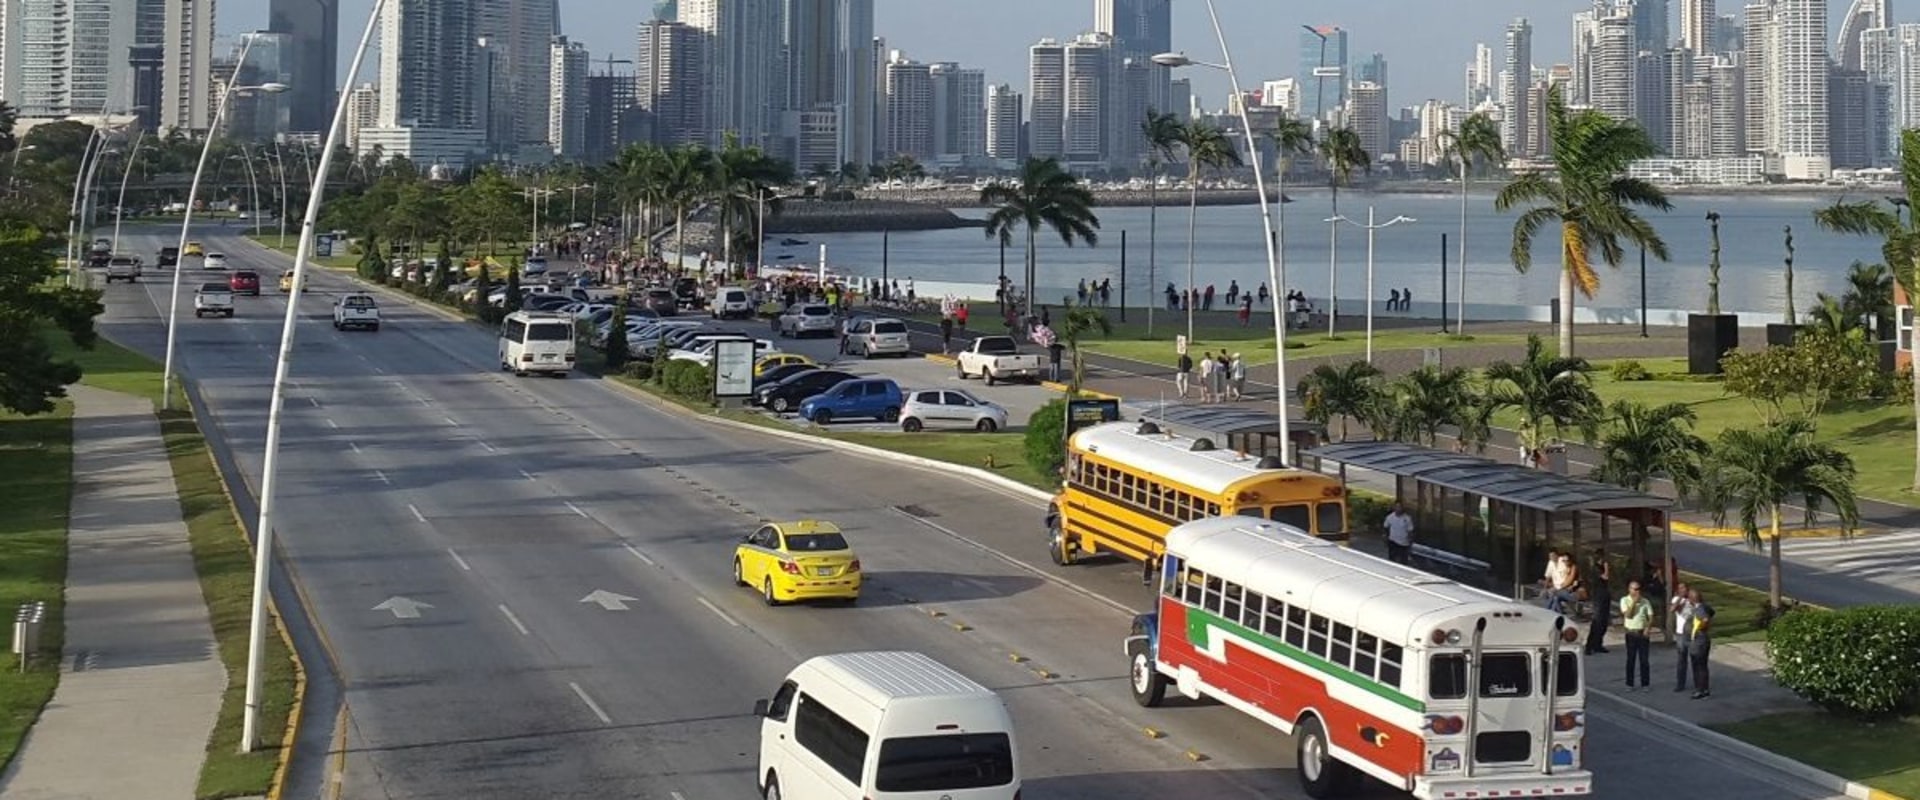 Exploring the Policies for Public Transportation in Panama City, FL